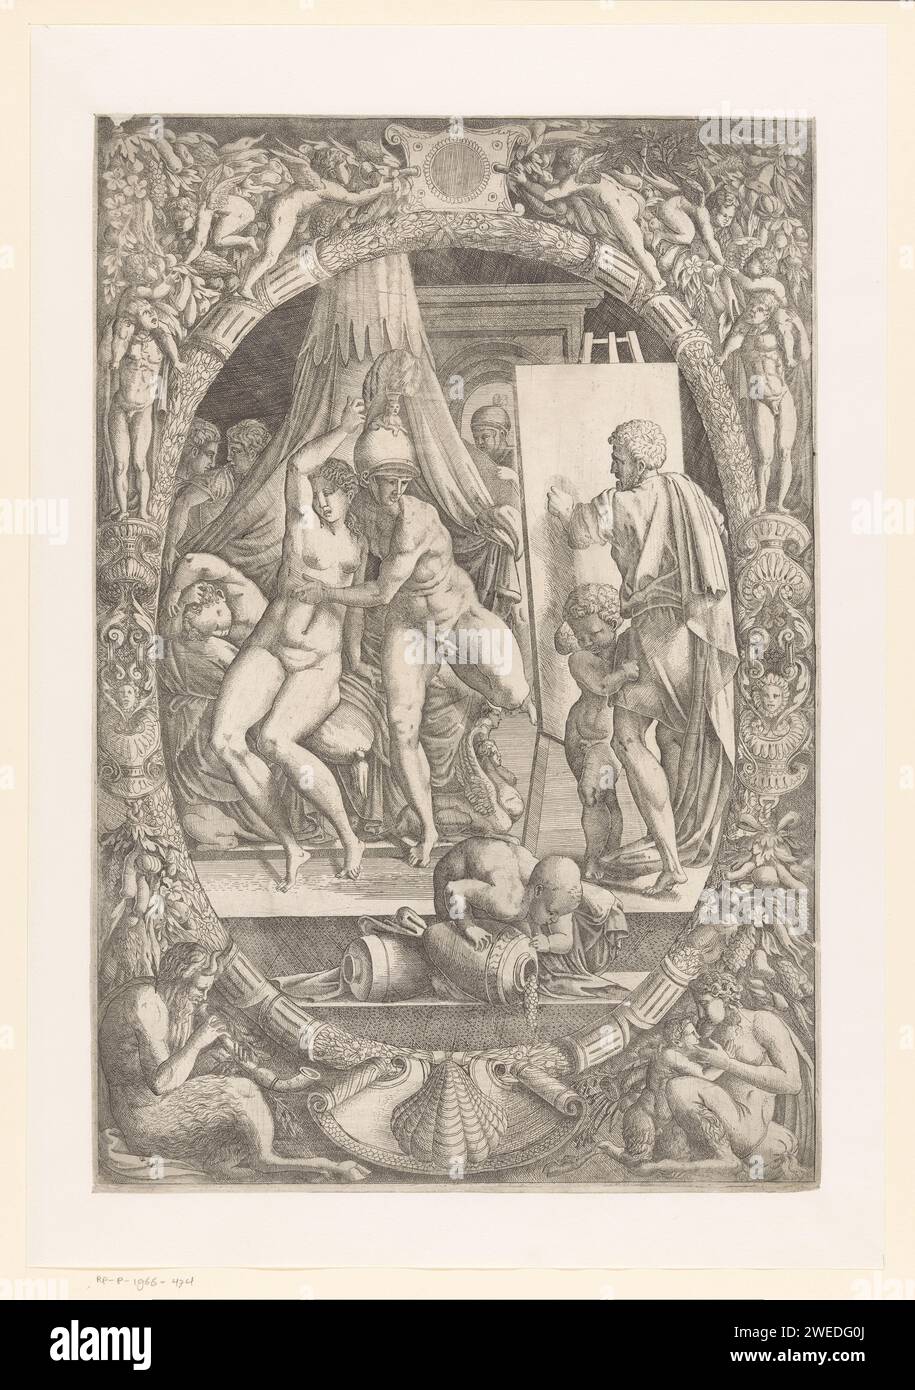 Apelles Schildert Alexander de Grote en Campaspe, monogrammist iqv, after Francesco Primaticcio, c. 1543 - c. 1545 print Alexander the Great and his beloved Campaspe pose for the painter Apelles, who stands behind his easel. The show is caught in a decorative oval list of saters, putti and fruits. Fontainebleau paper etching Apelles paints Campaspe and falls in love with her; Alexander yields her to him. cupids: 'amores', 'amoretti', 'putti'. satyr(s) (in general) Stock Photo